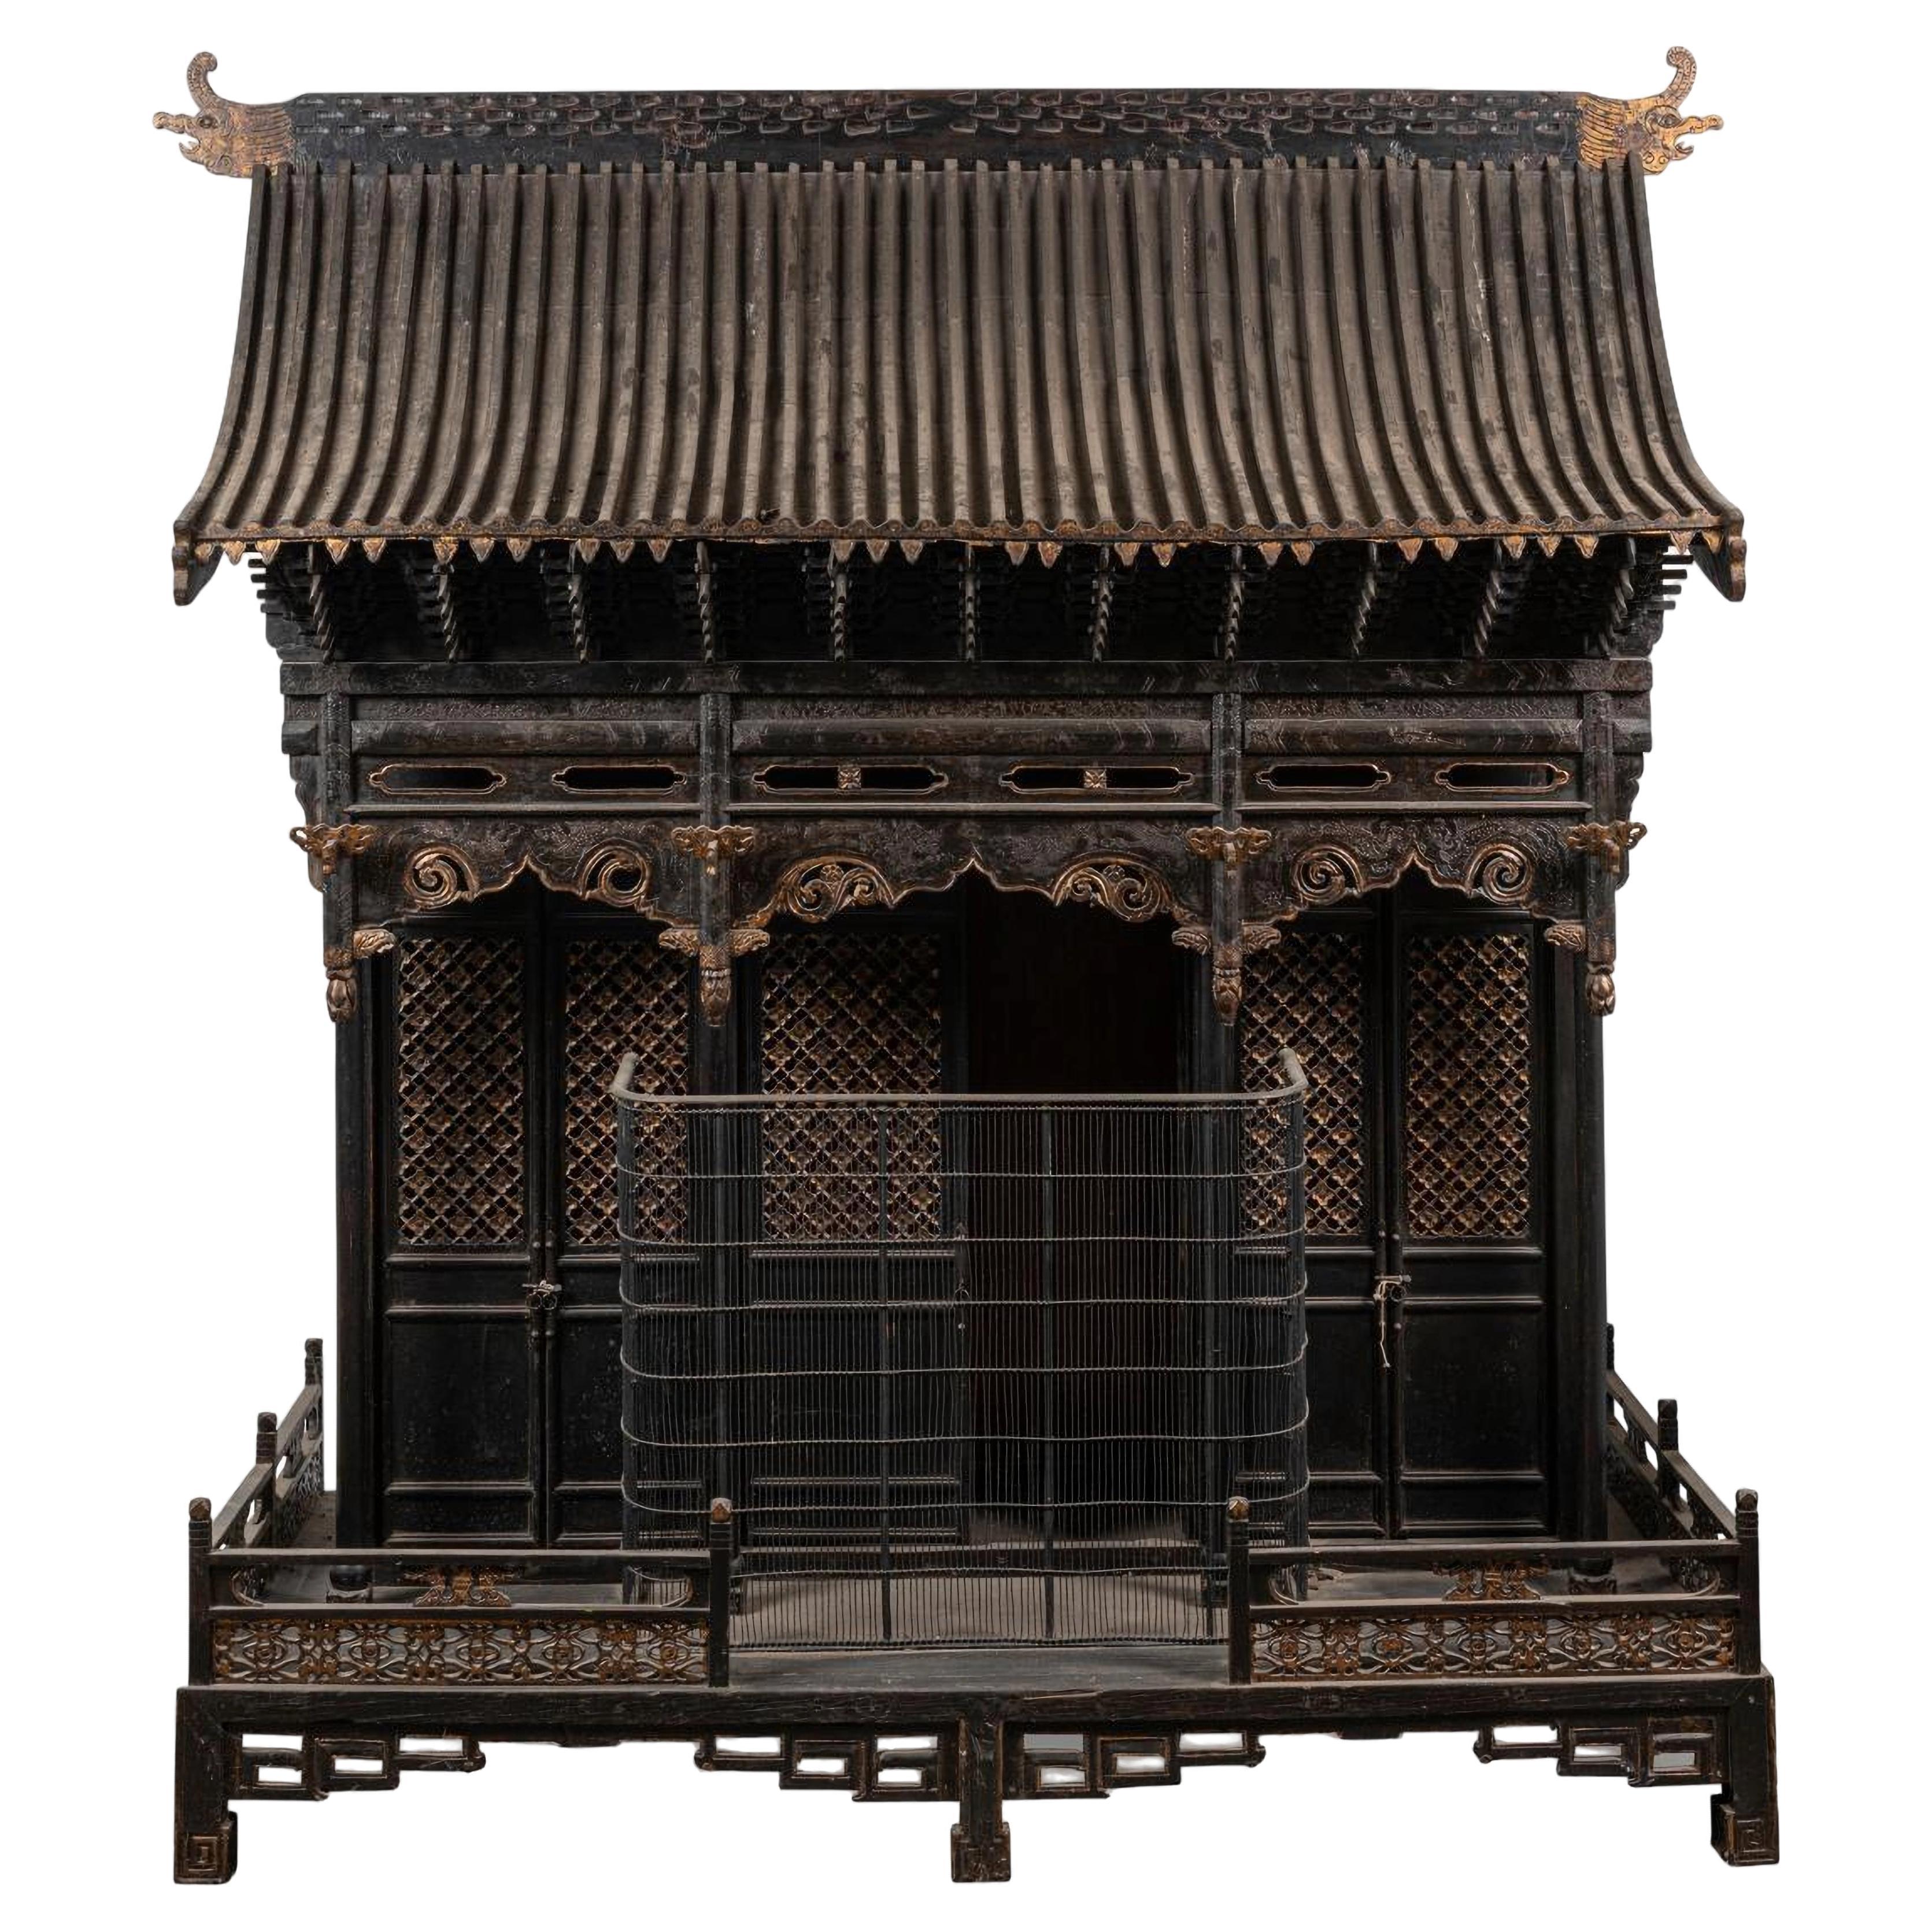 An Impressive Large Chinese Black Lacquered Wood Temple, Late 19th Century